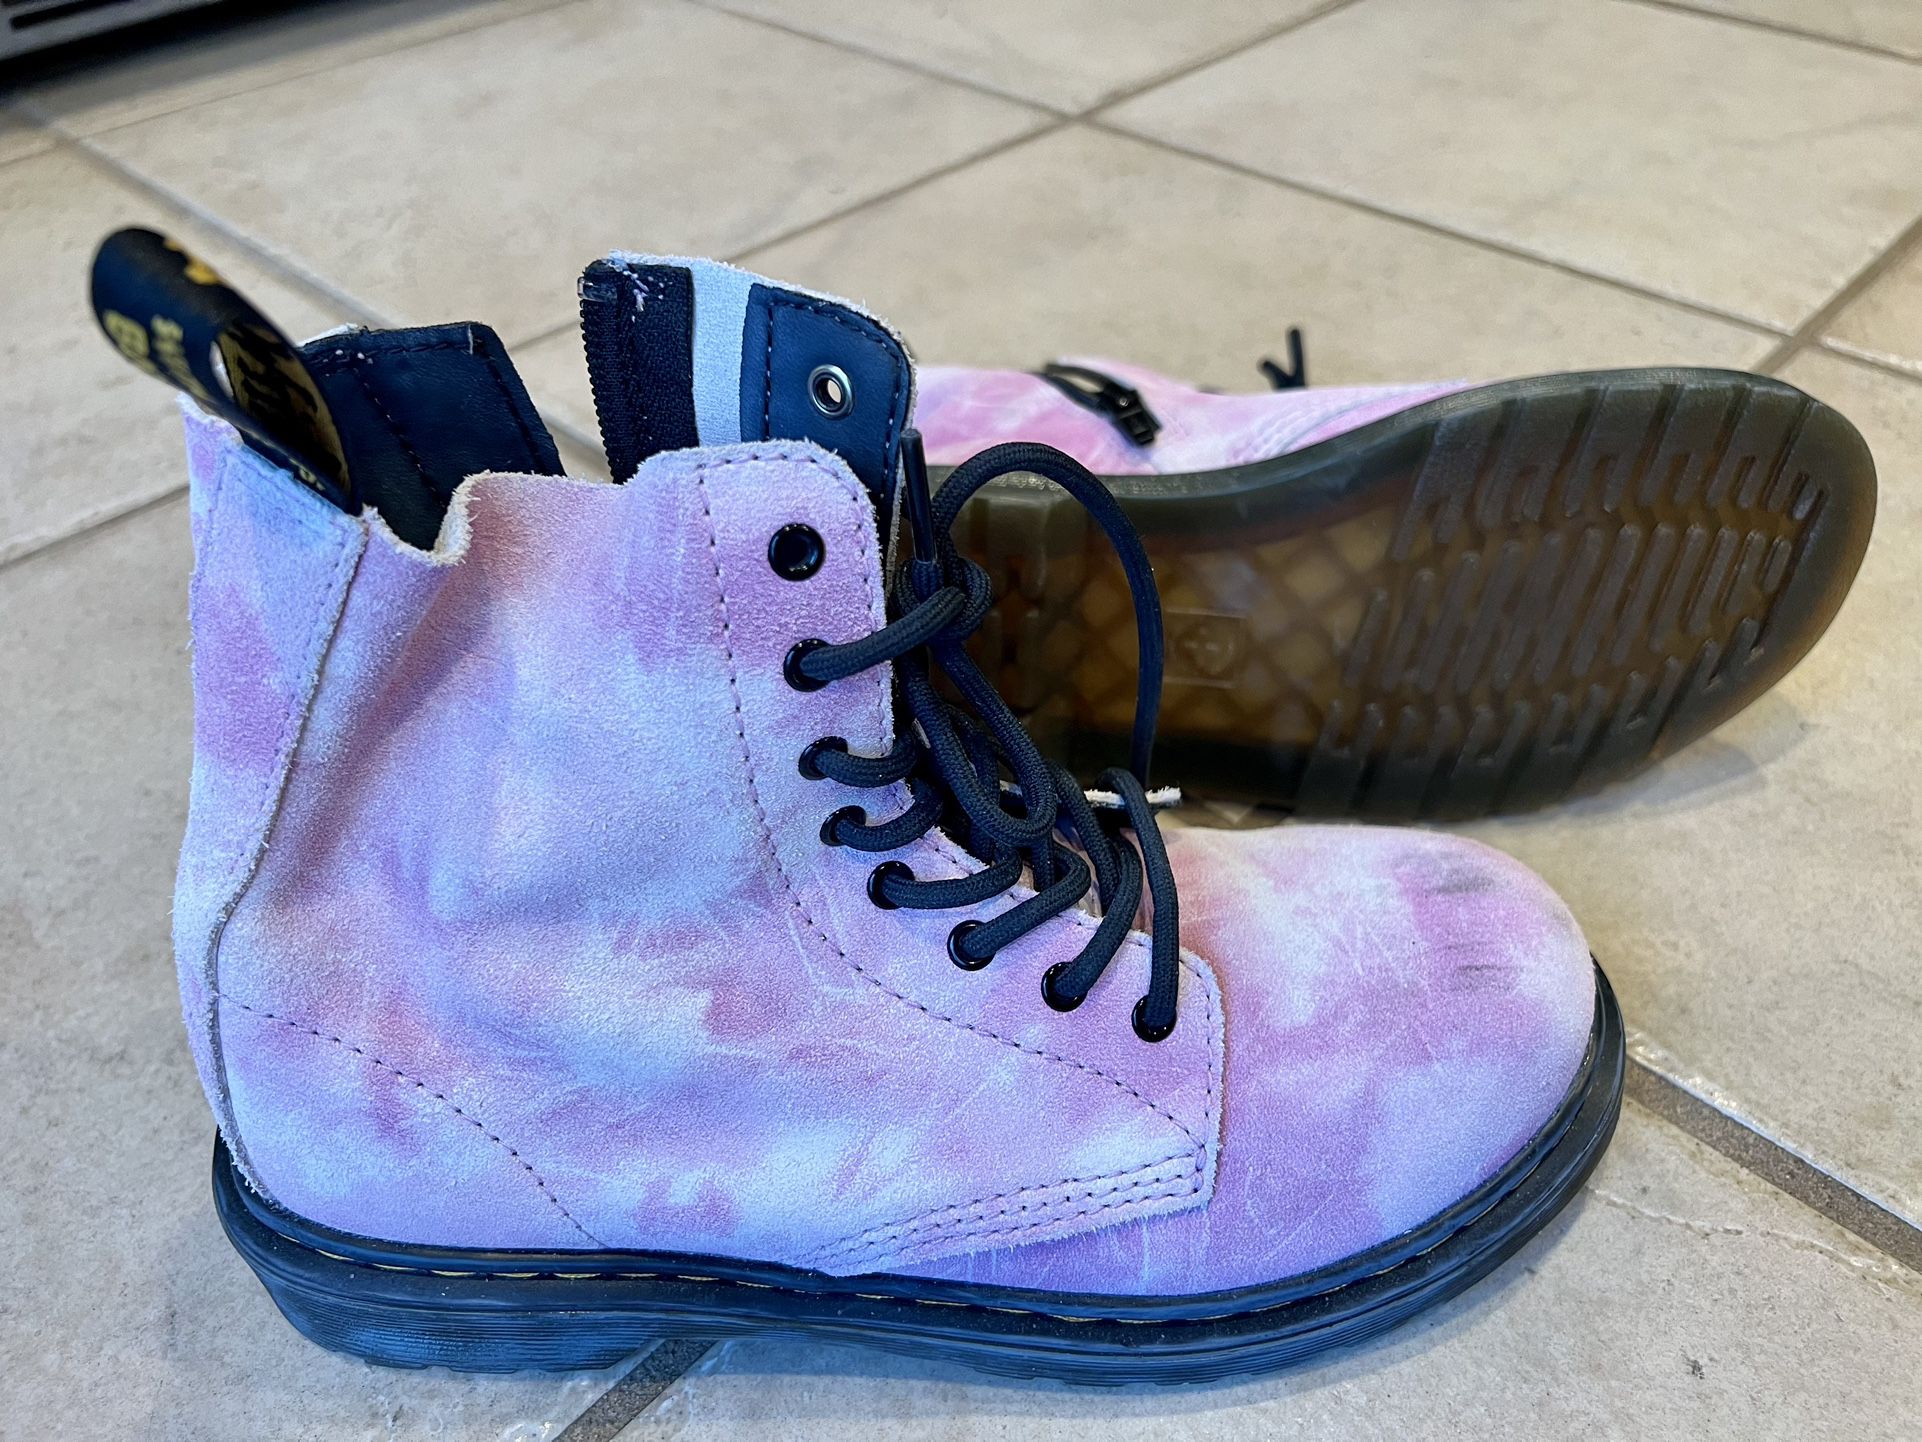 Dr. Martens Girl Boots Shoe Size 4 M 1460 pascal j Pink